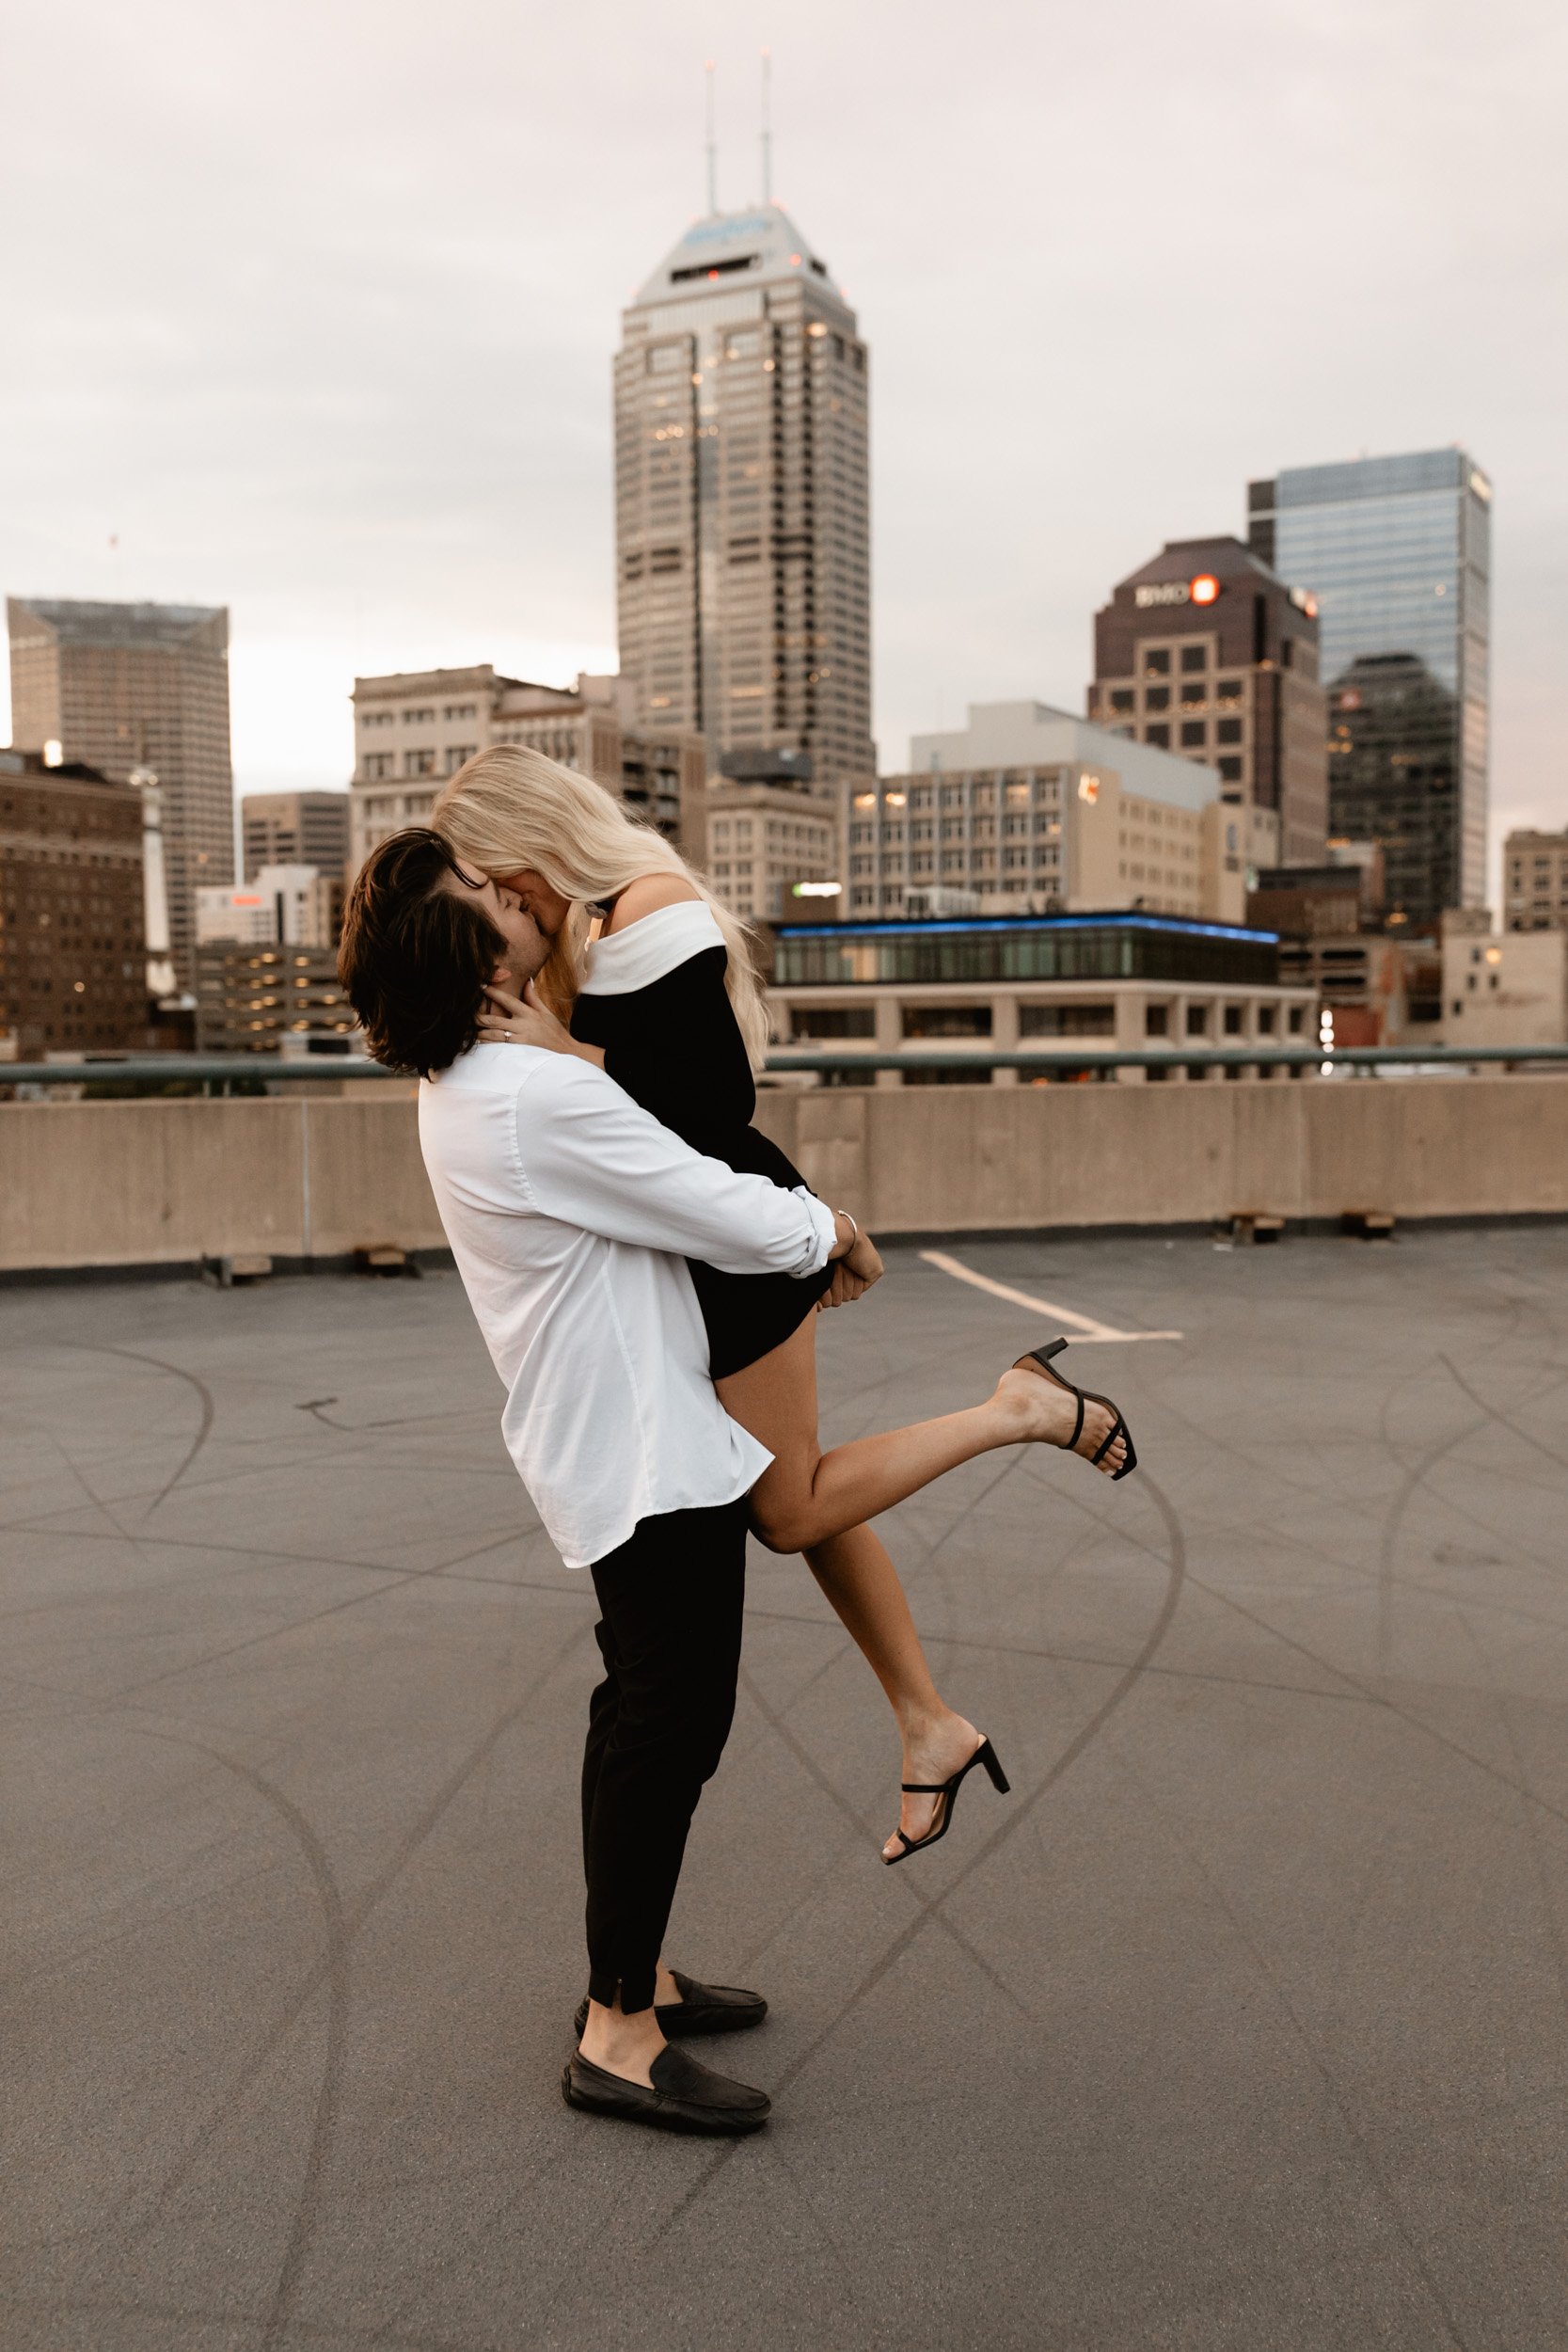 downtown-indianapolis-engagement-shoot-27.jpg